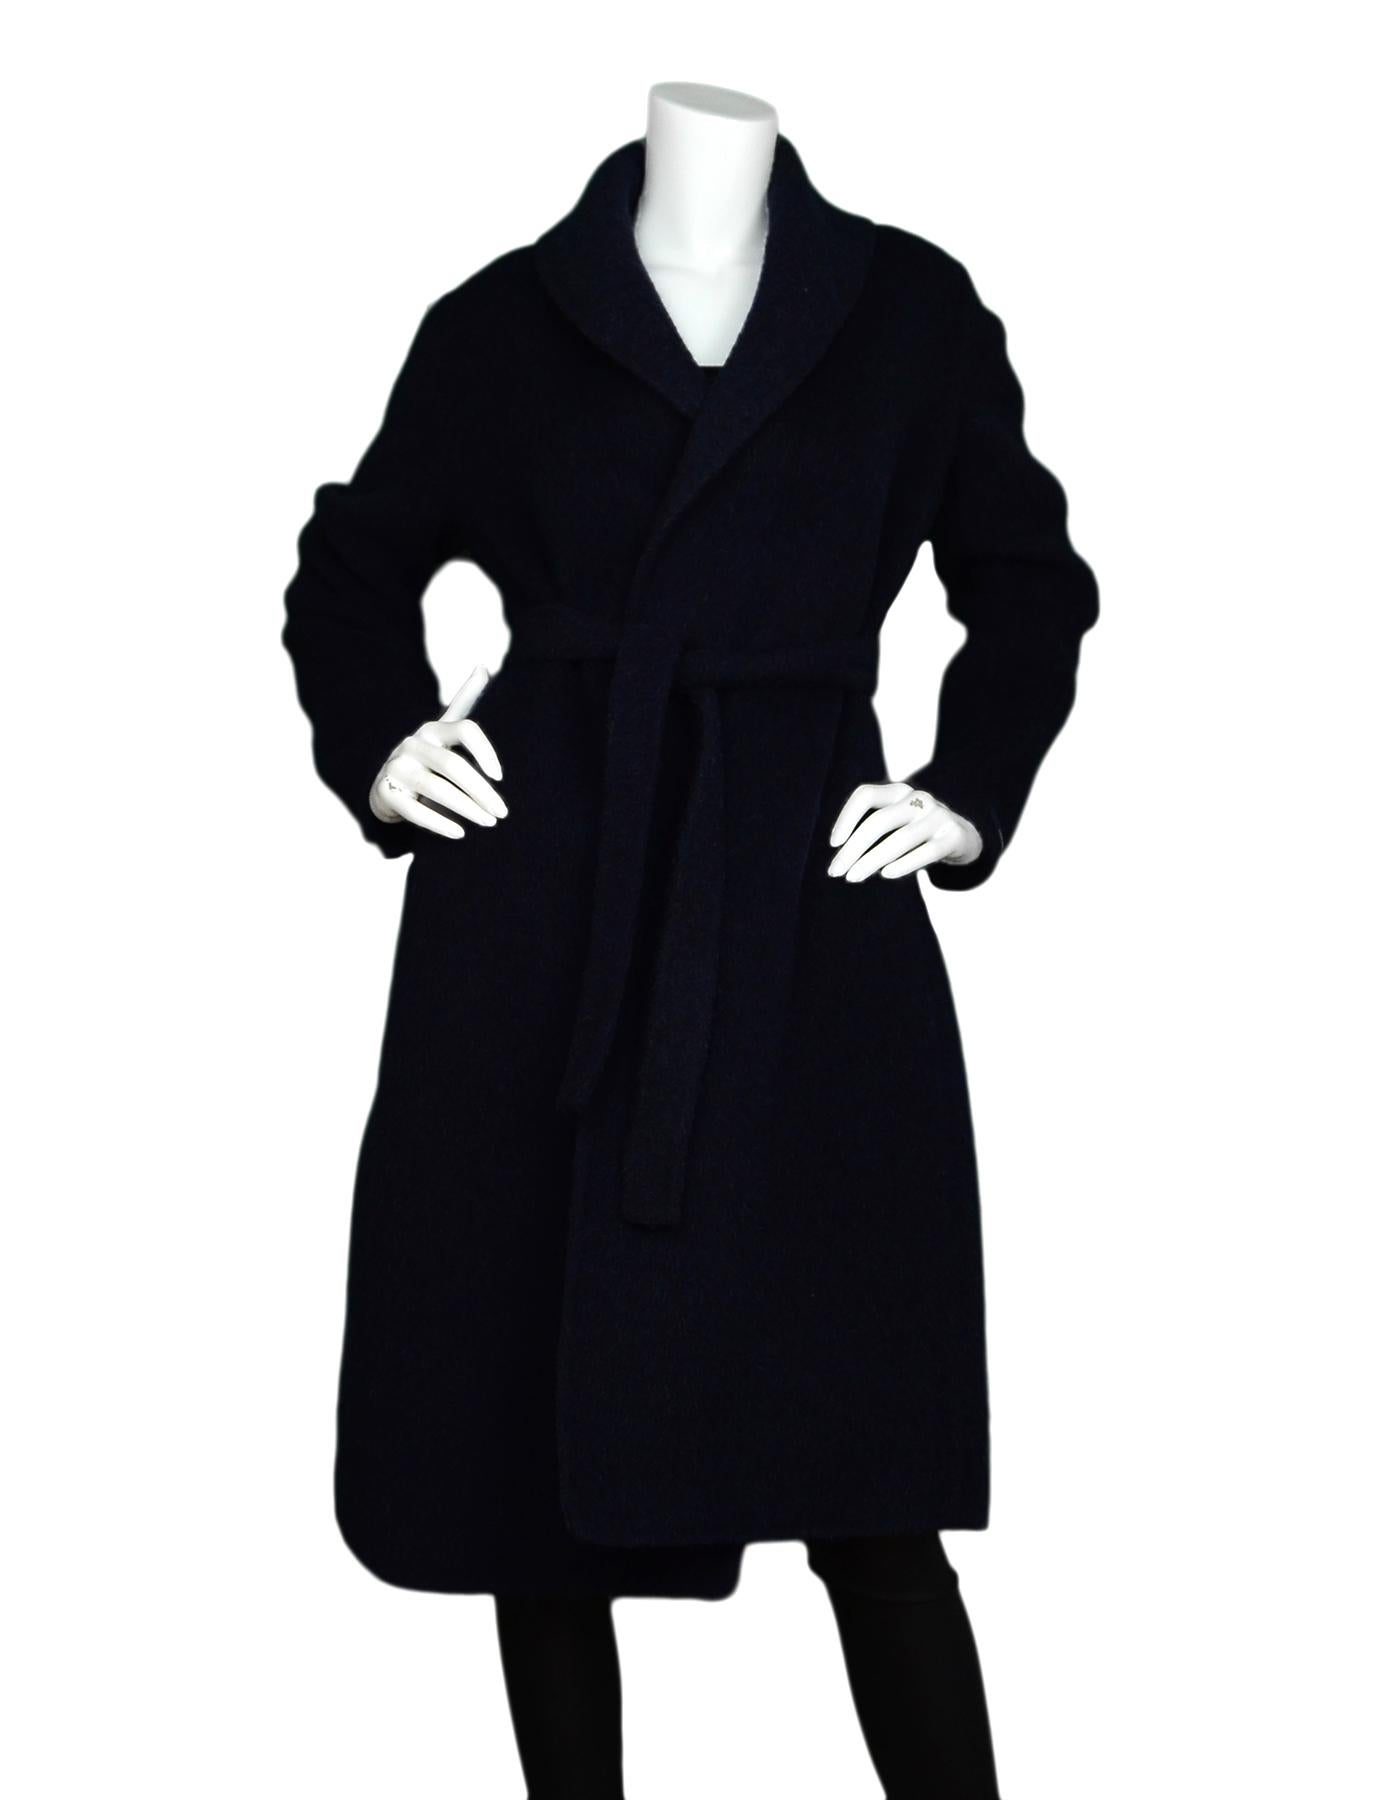 'S Max Mara Navy Wool Blend Wrap Coat W/ Belt Sz 10

Made In: Romania
Color: Navy
Materials: 56% wool, 38% alpaca, 4% angora rabbit, 2% cotton
Lining: 100% silk
Opening/Closure: Tie belt
Overall Condition: Excellent pre-owned condition